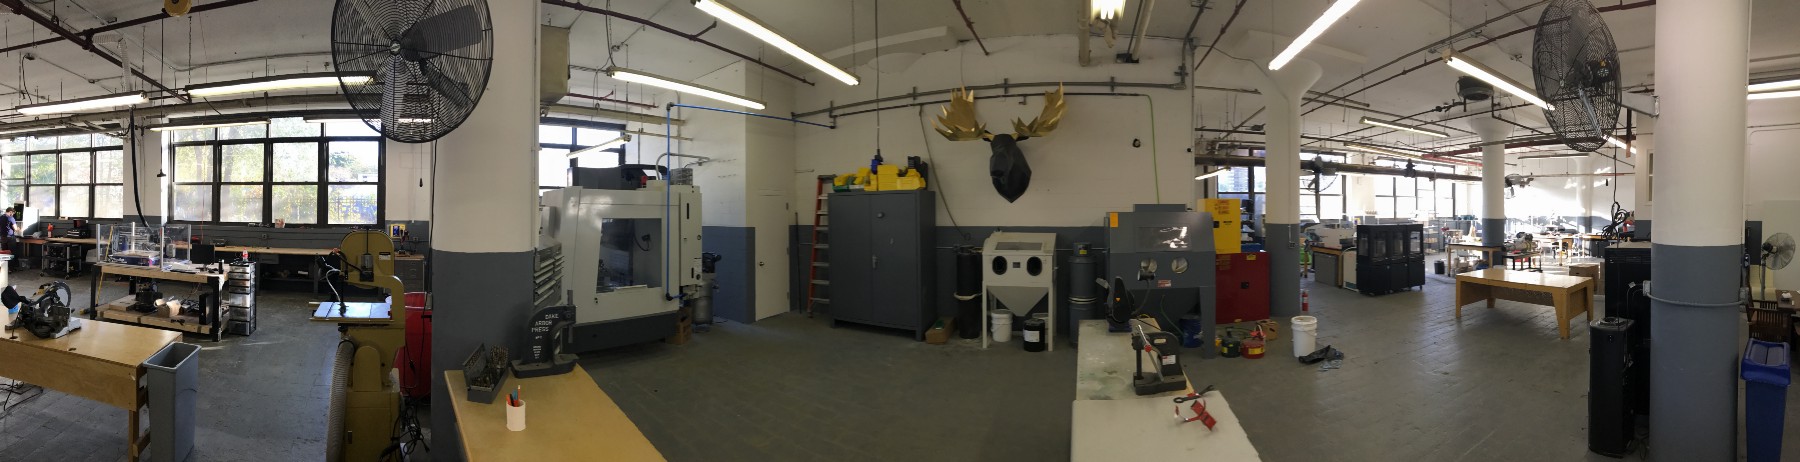  The workshop at Bre & Co 